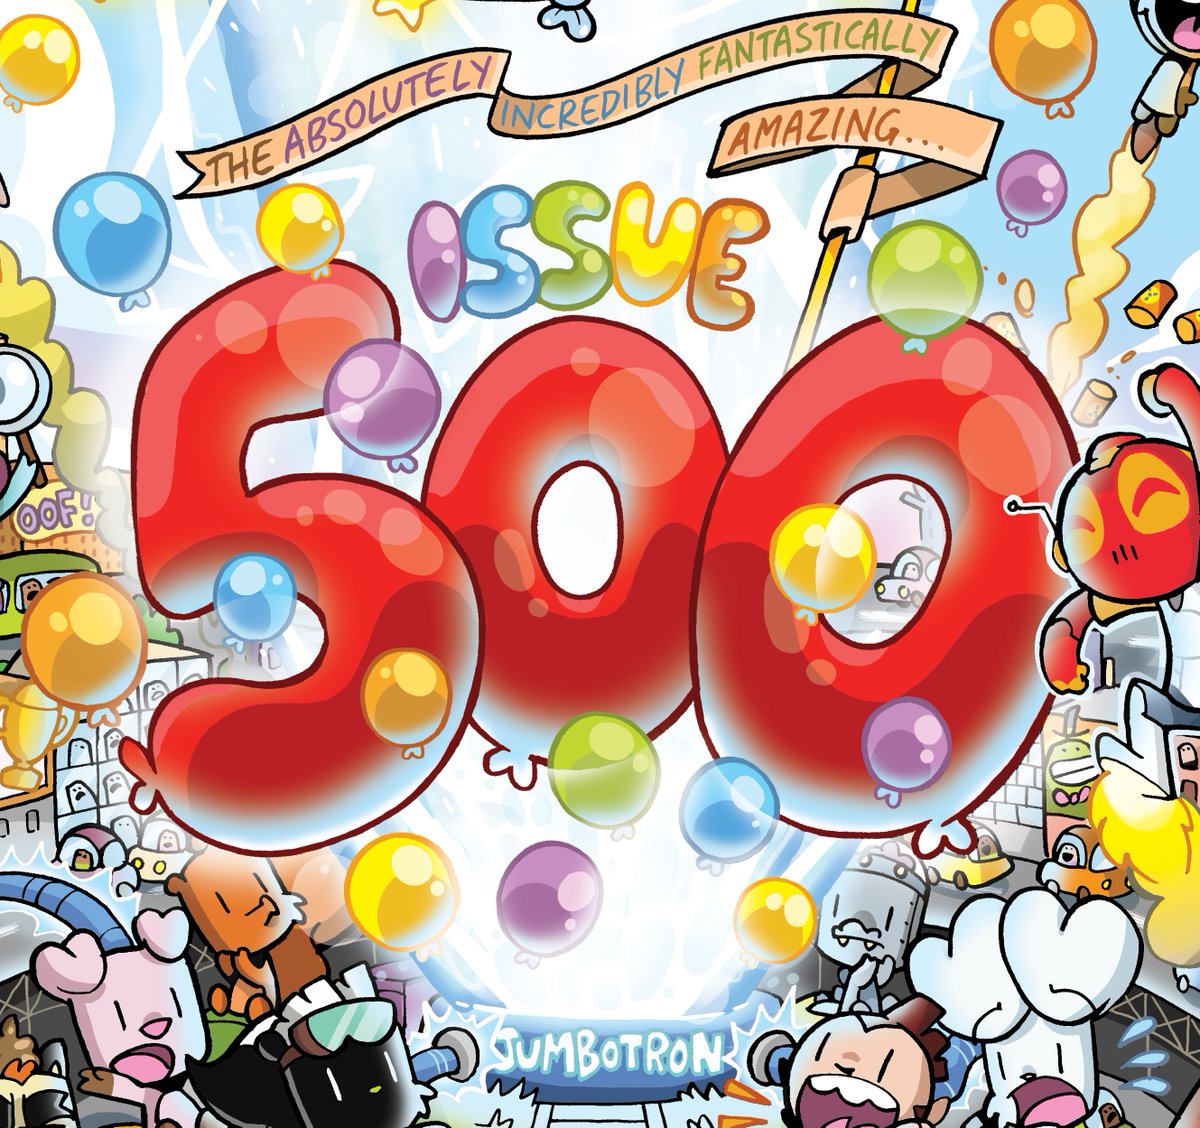 Have we already mentioned that it's our 500th issue this week?! Here is a sneak peak at part of the STUPENDOUS cover created by the INCREDIBLE @jamiesmart !! We can't wait for you all to see it! 🥳🎉🤩✨🥰 #issue500 #phoenixcharacters #celebrations #tuesdayvibe #comics